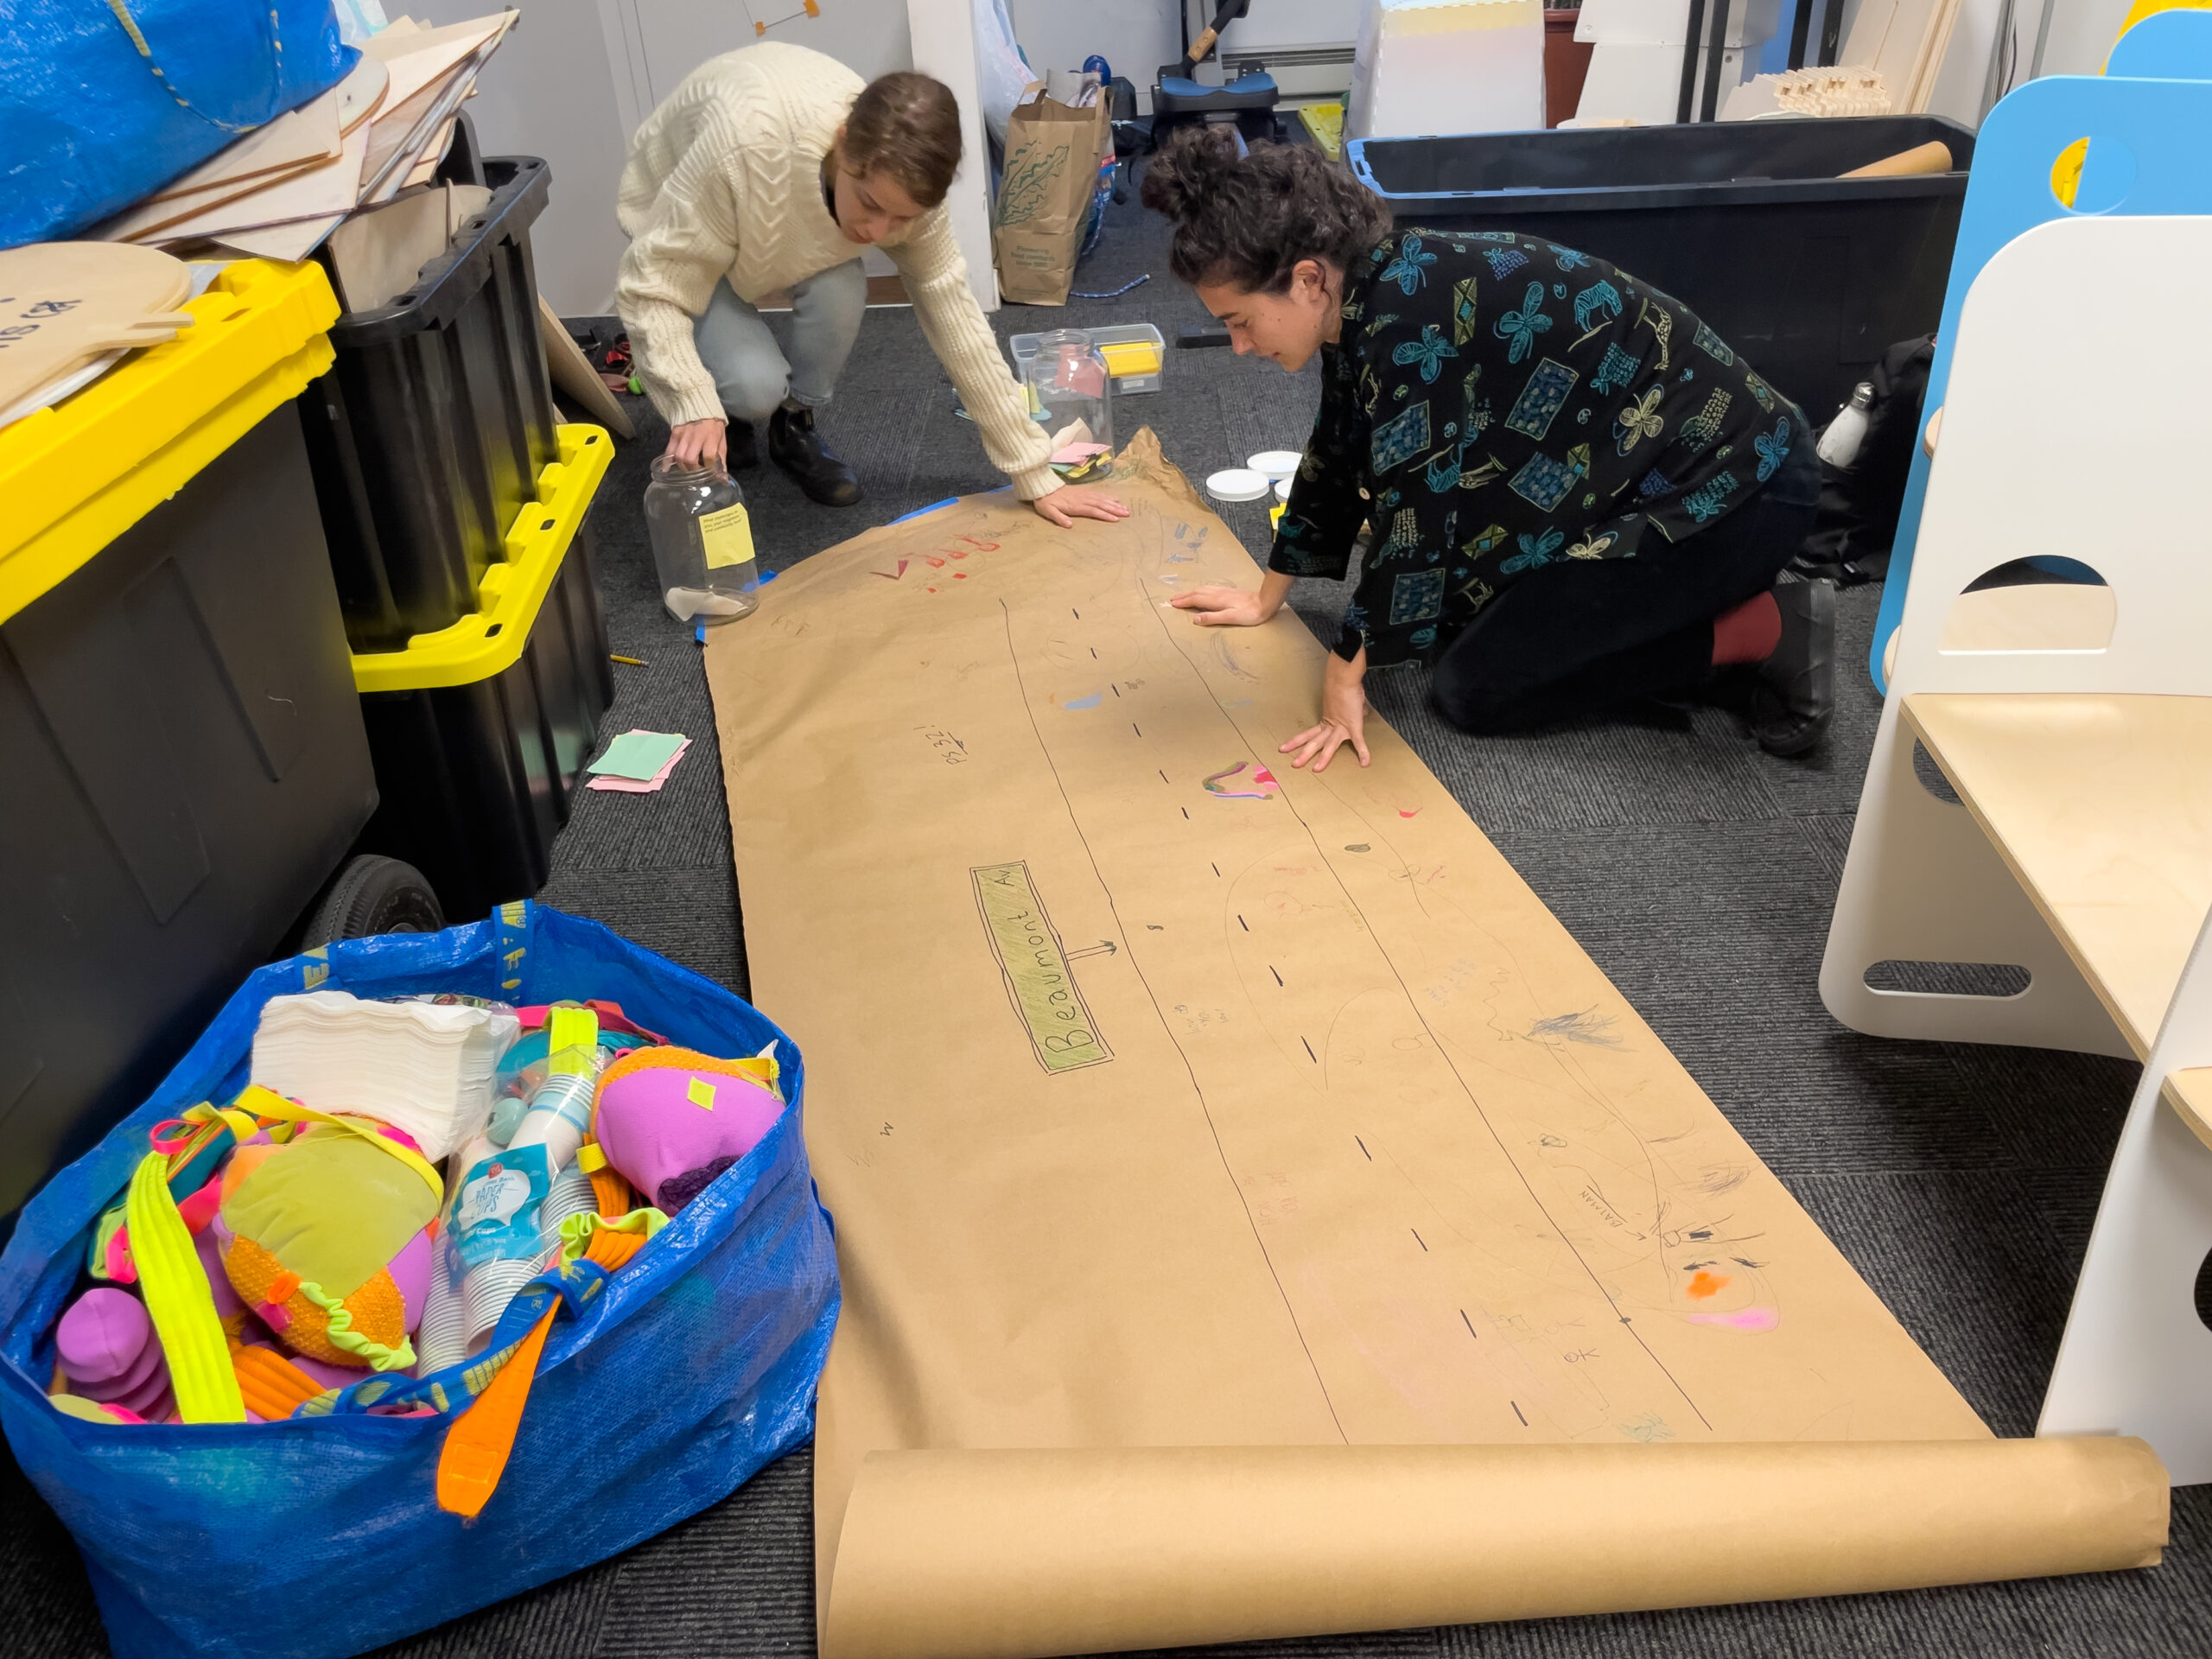 Two women working on the floor with a roll of craft paper and drawings on it.